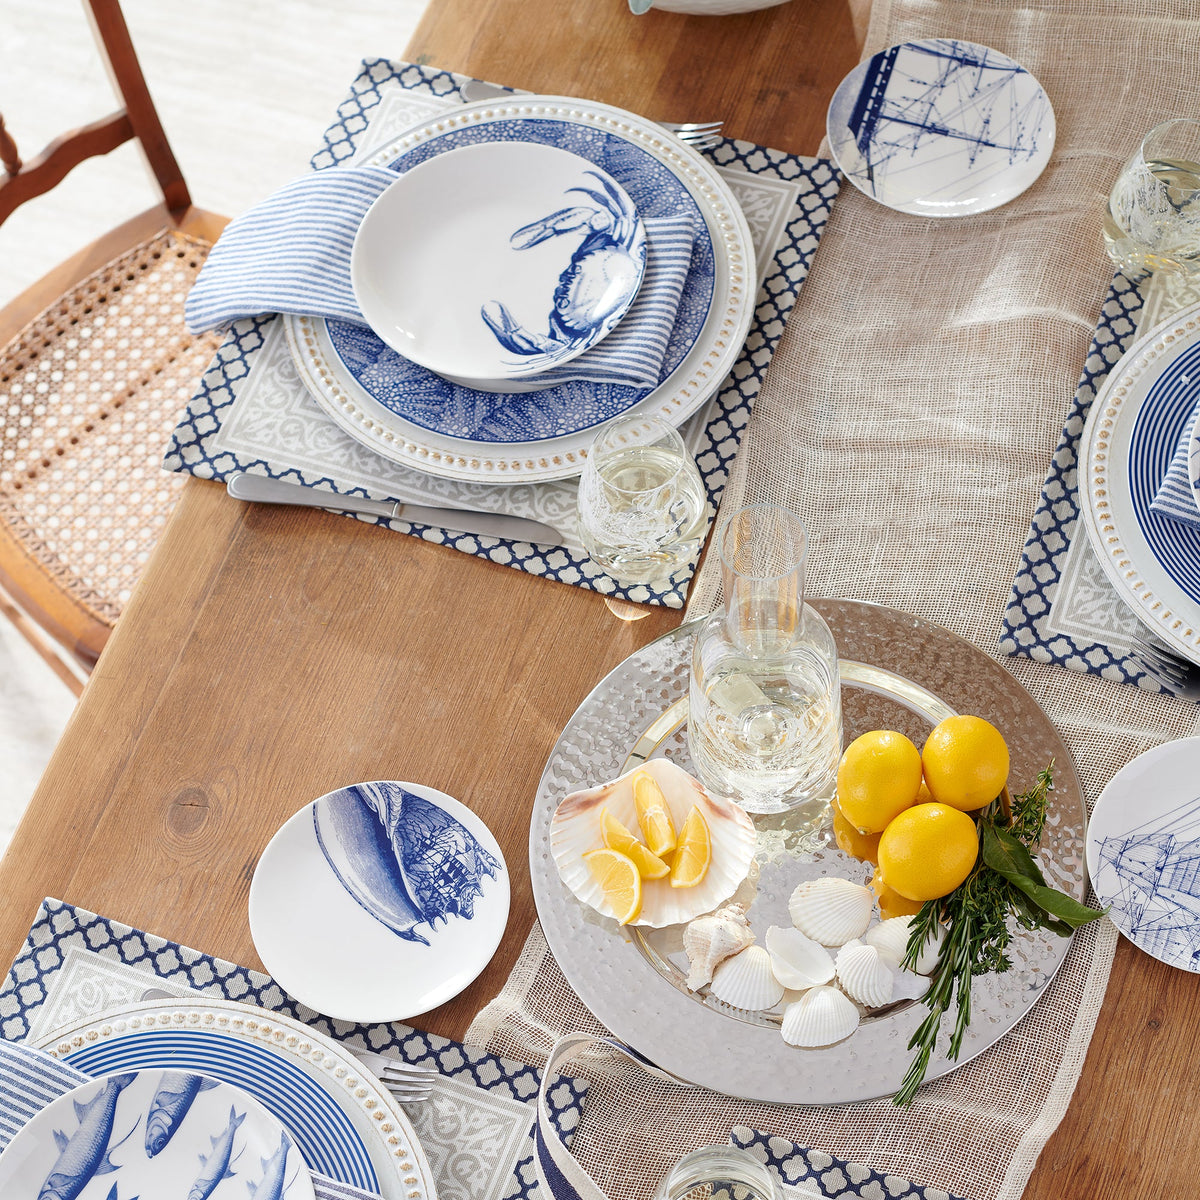 A wooden table is set with Rigging Small Plates from Caskata Artisanal Home featuring blue and white sea life designs, cloth napkins, a tray with lemons and seashells, and glasses of white wine.